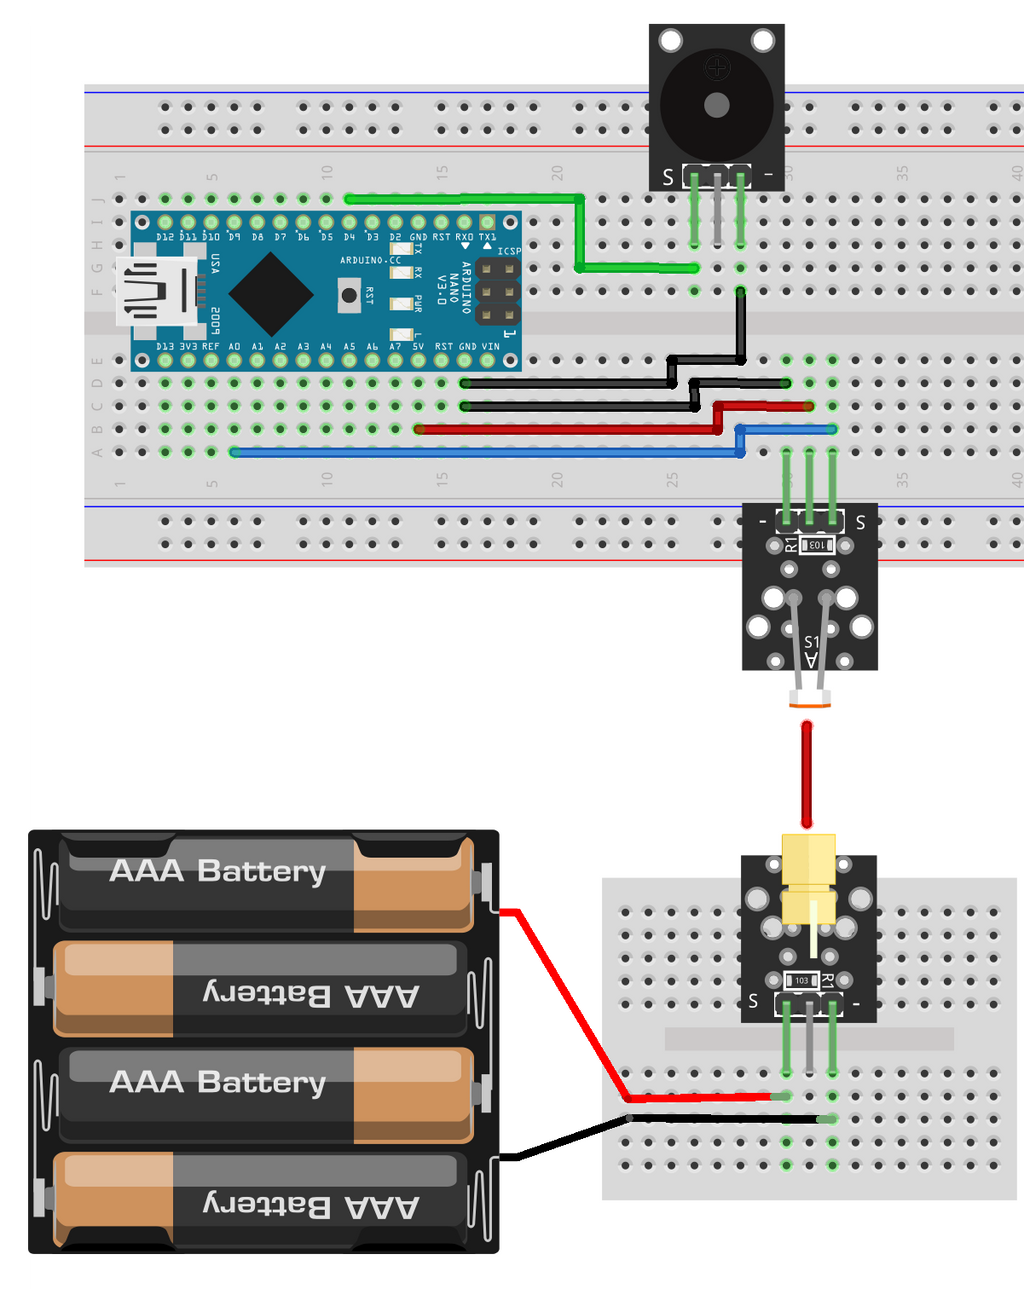 Alert System with Photo Resistor, Buzzer and Laser (Concept)